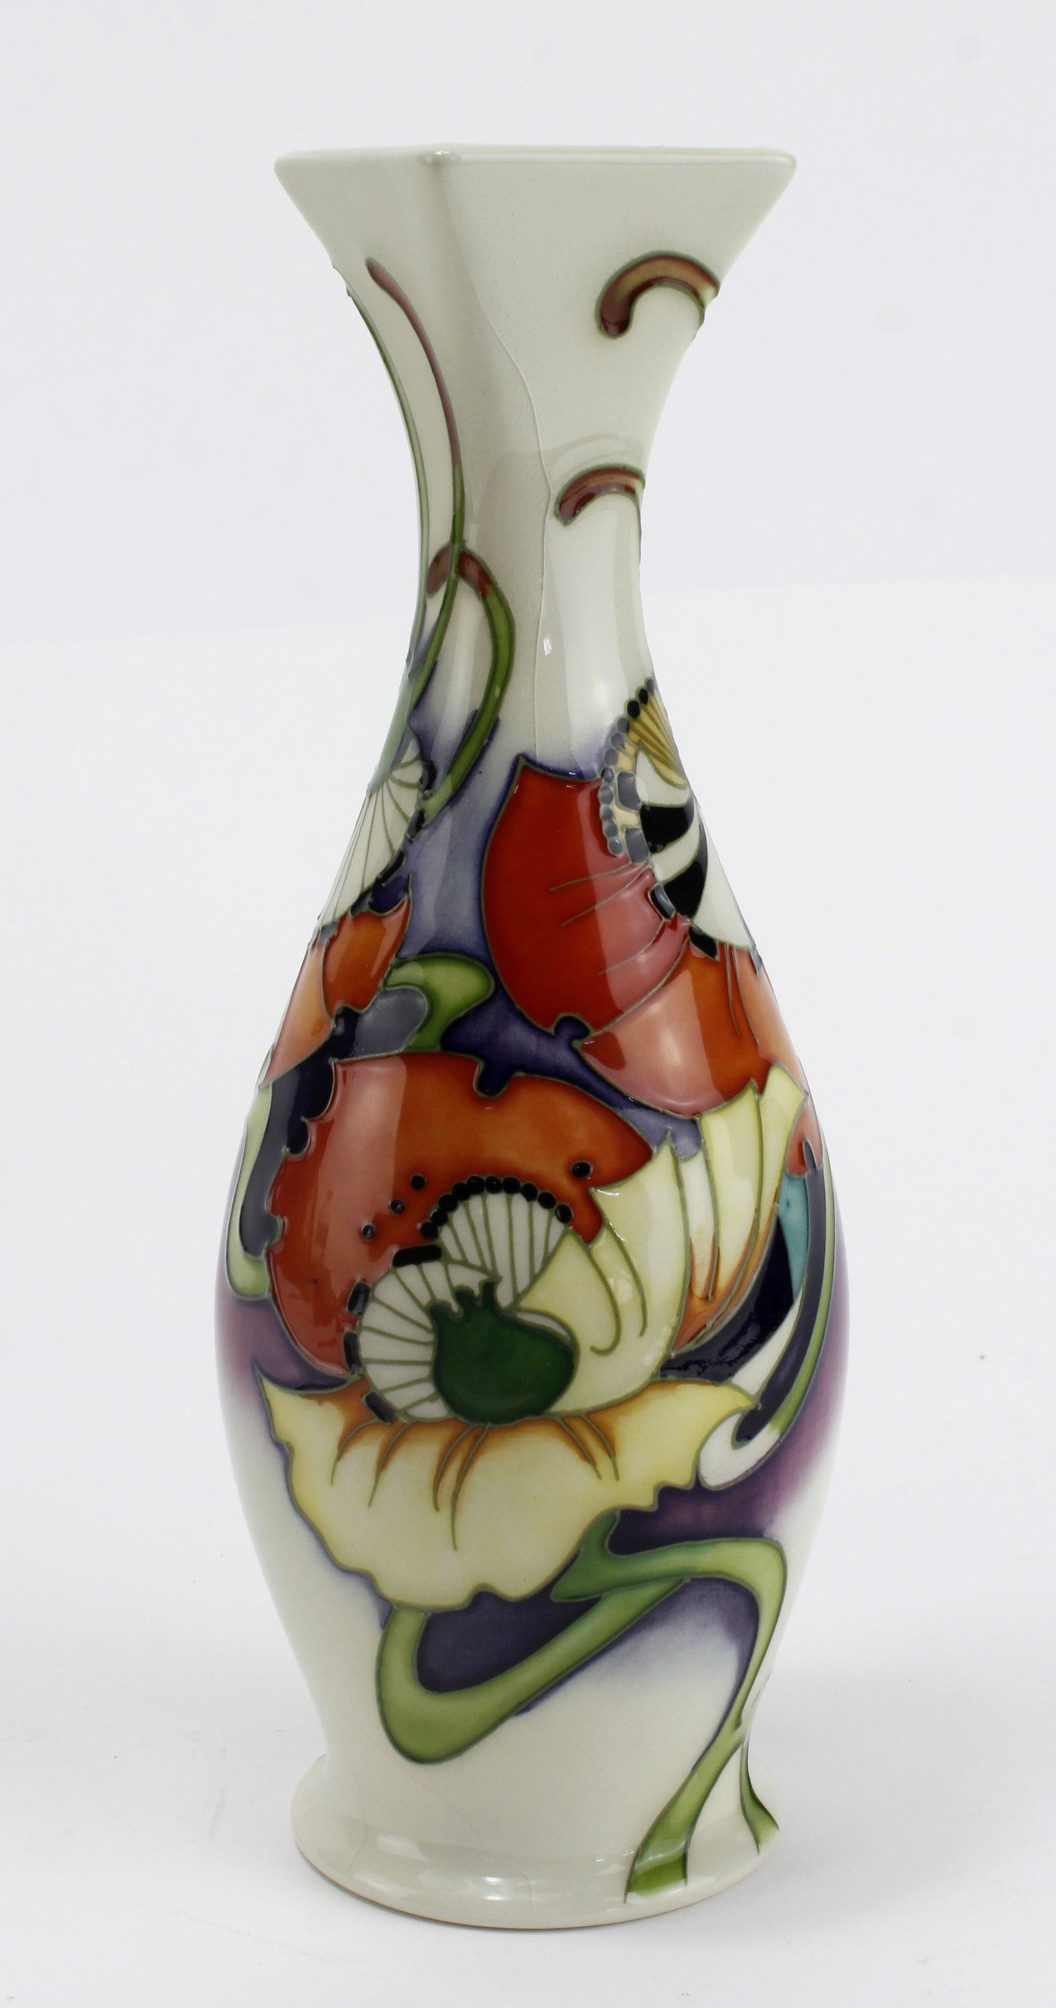 Moorcroft "Demeter" vase signed Emma Bosson M.C.C. 2008. Height 22cm approx. 1st quality.